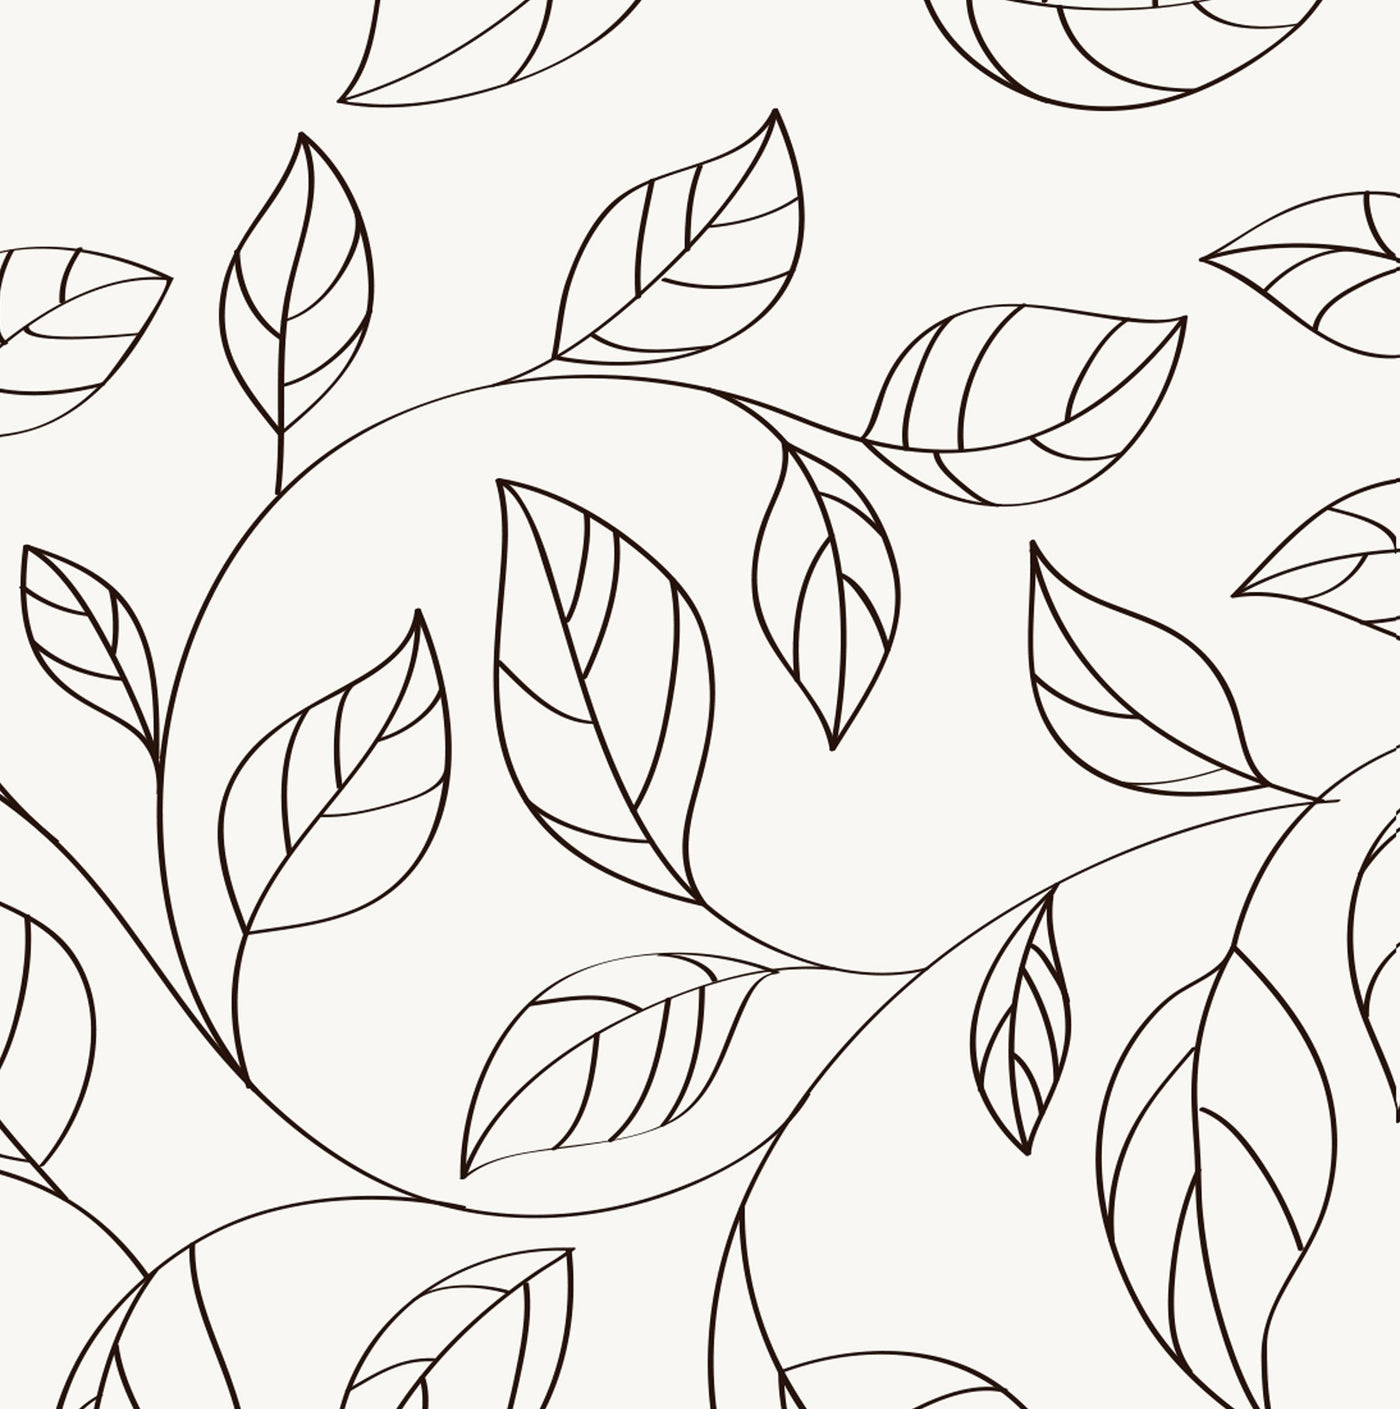 Dainty Leaves Mural Wallpaper (m²)-Wall Decor-BLACK & WHITE WALLPAPER, LEAF WALLPAPER, MURALS, MURALS / WALLPAPERS, NON-WOVEN WALLPAPER-Forest Homes-Nature inspired decor-Nature decor